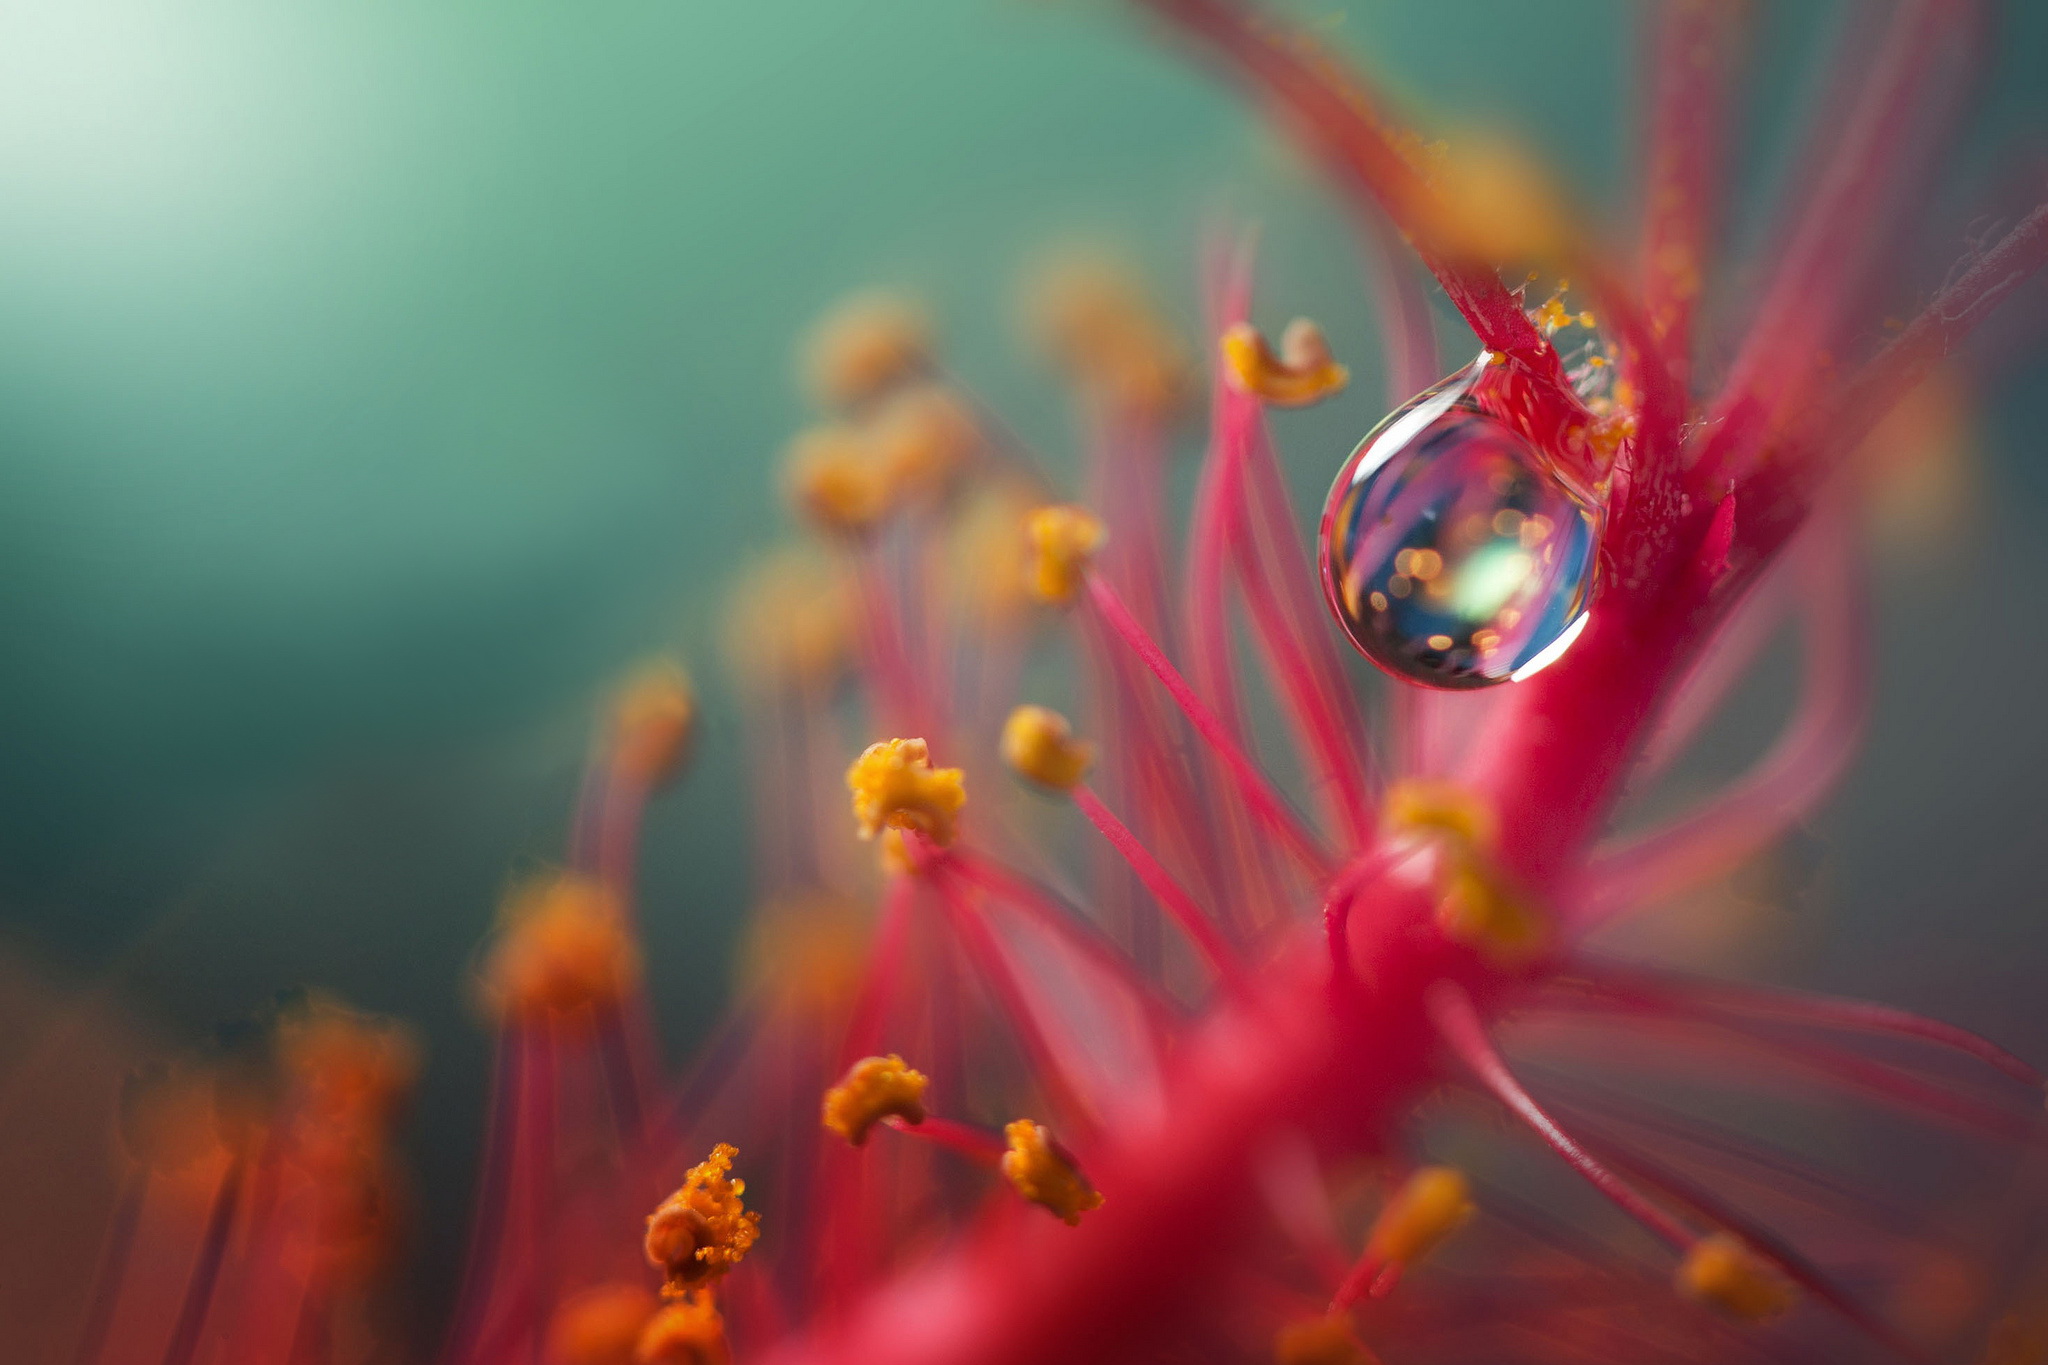 Reflected in the drop